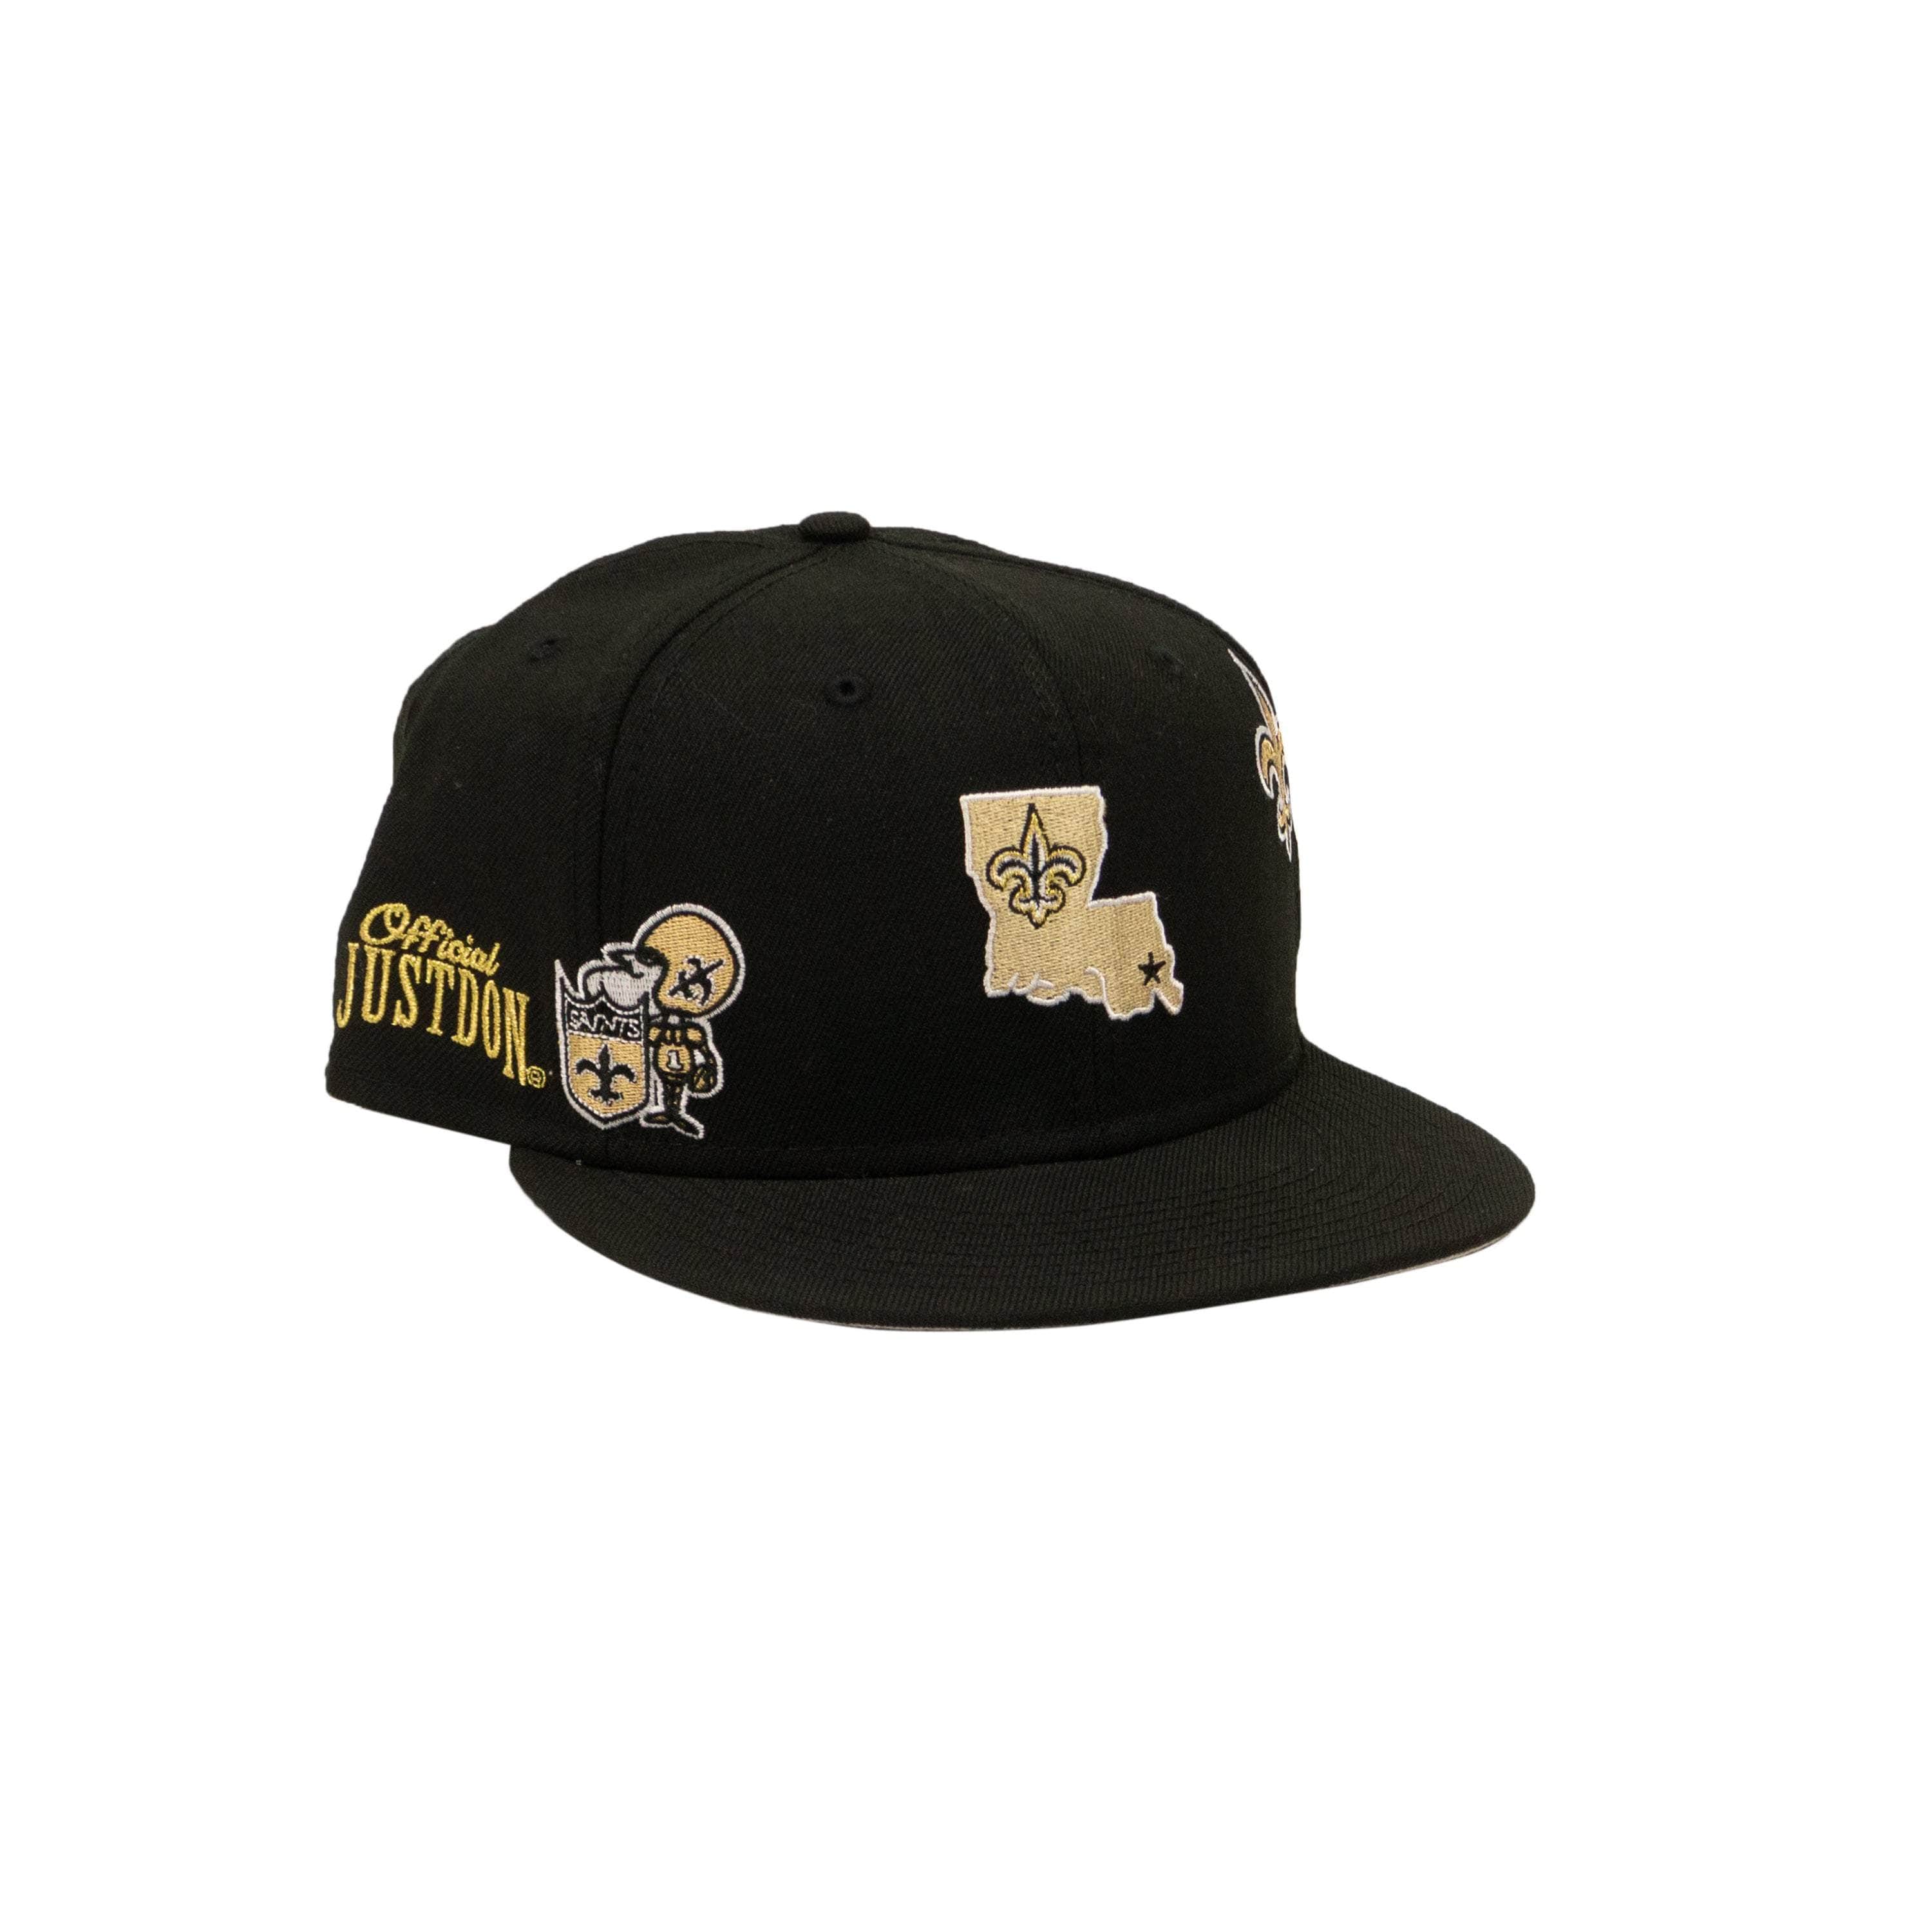 Just Don channelenable-all, chicmi, couponcollection, gender-mens, just-don, main-accessories, mens-shoes, size-7_3-4, under-250 7_3-4 Black 59 Fiffty New Orleans Saints Cap JSD-XACC-0001/7_3-4 JSD-XACC-0001/7_3-4